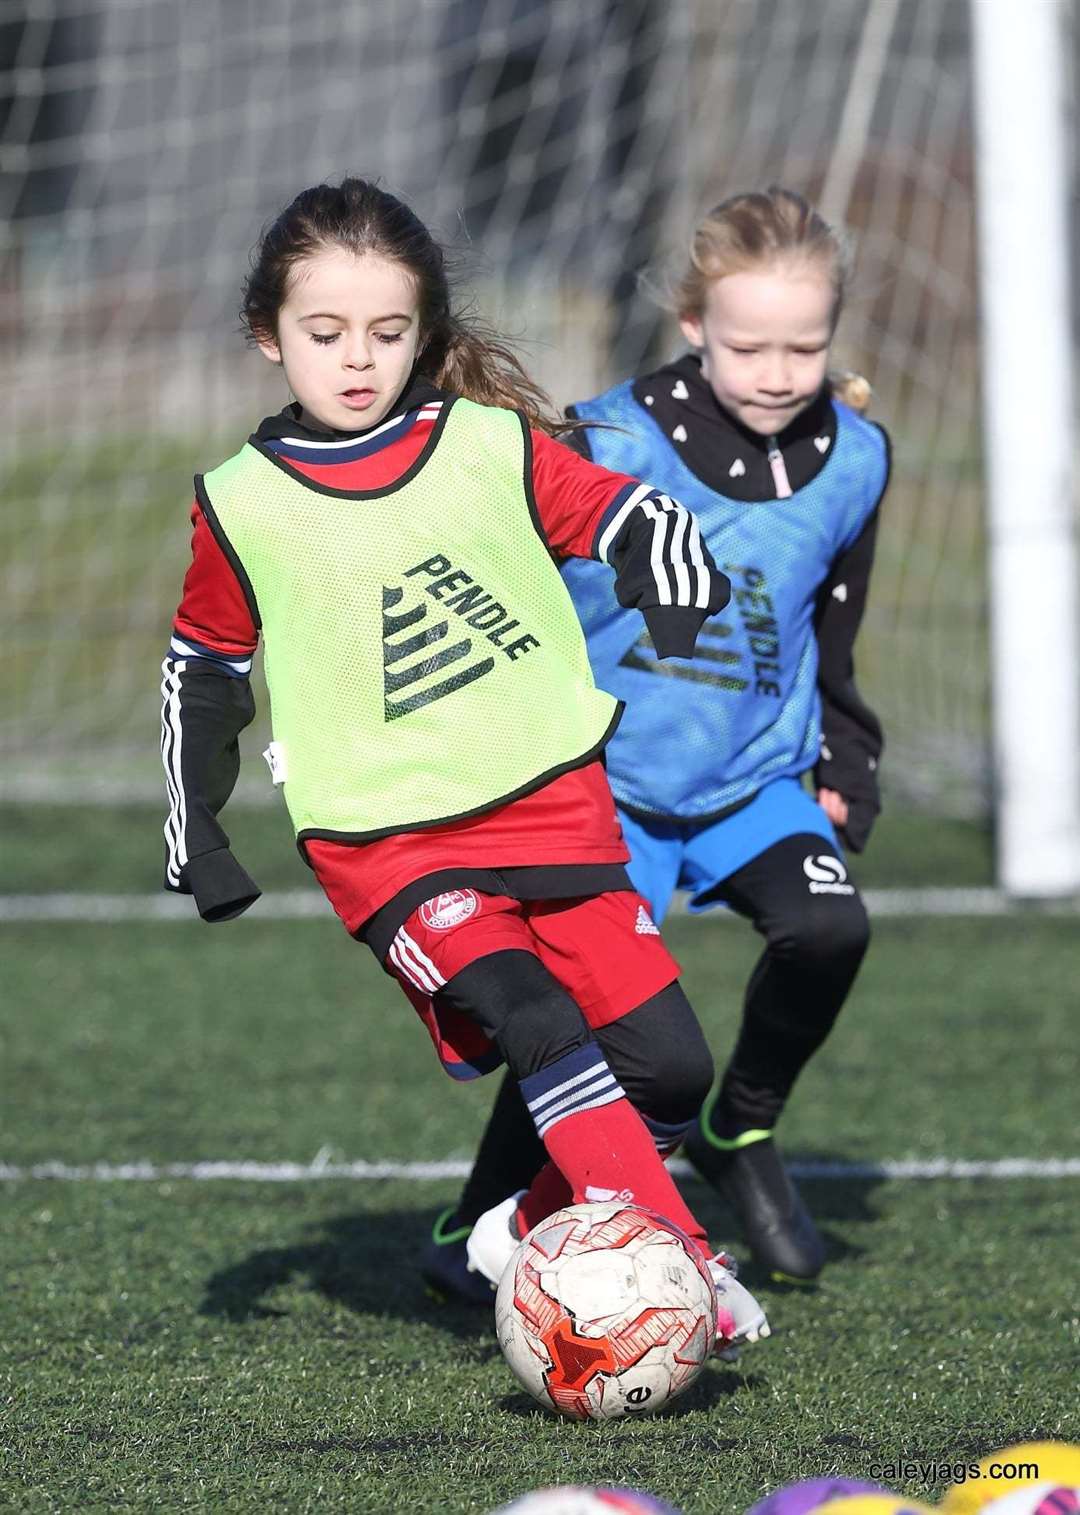 Thistle Girls' younger age groups return to training under Caley Thistle's guidance after threat to future of girls' football in Inverness